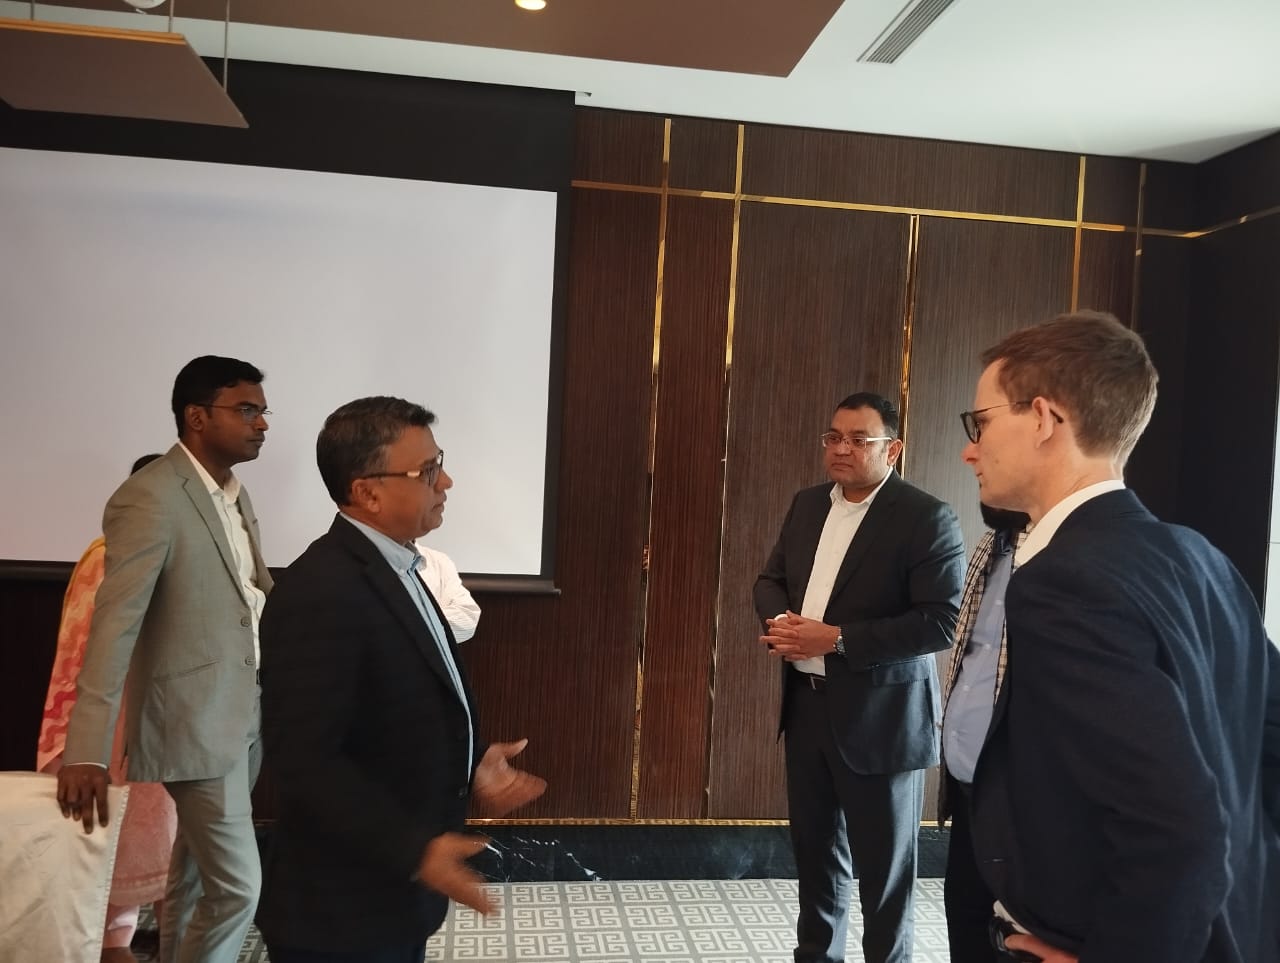 Bangladesh's First Blockchain Pilot Projects: World Bank Meeting with FAPAD officials